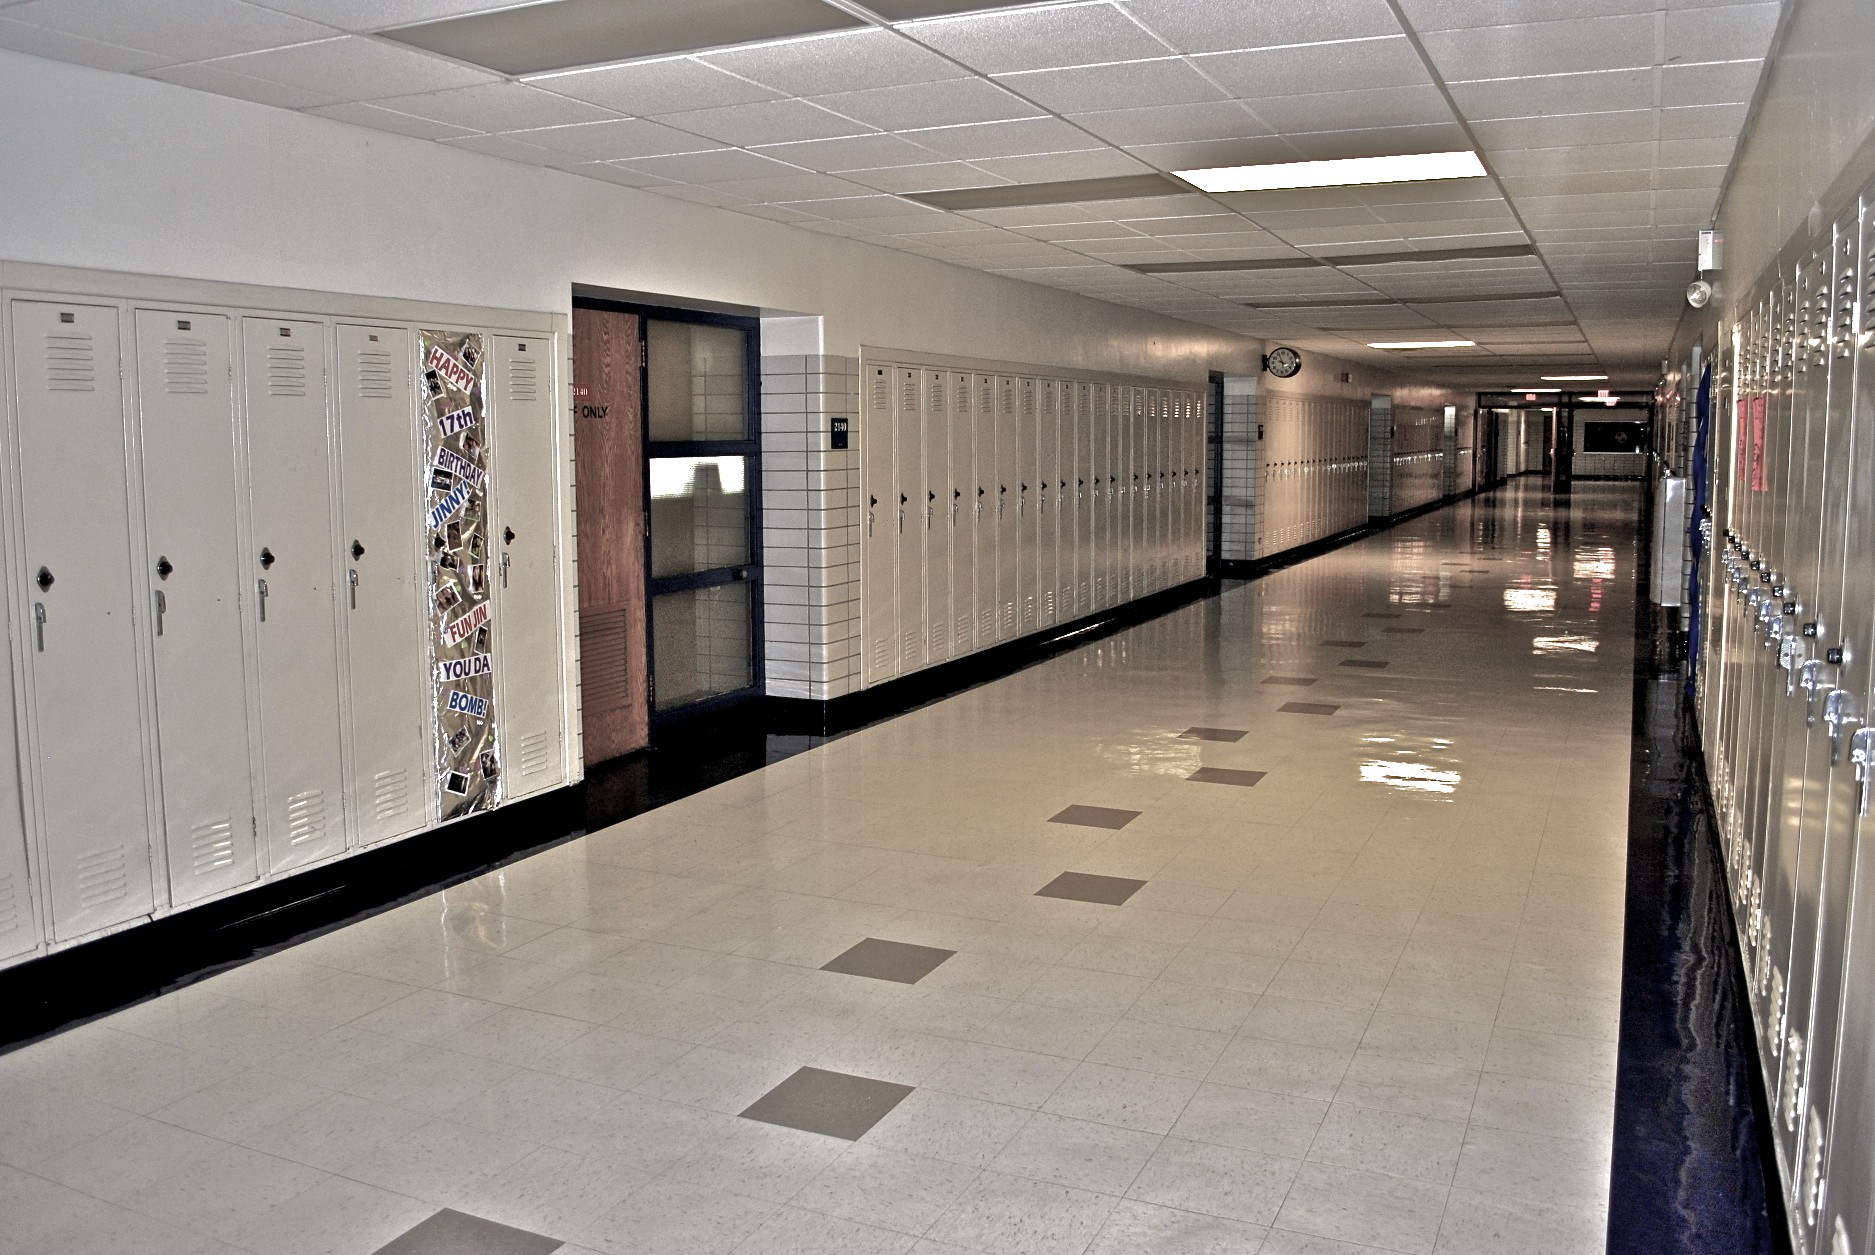 a long, empty hallway with multiple lockers